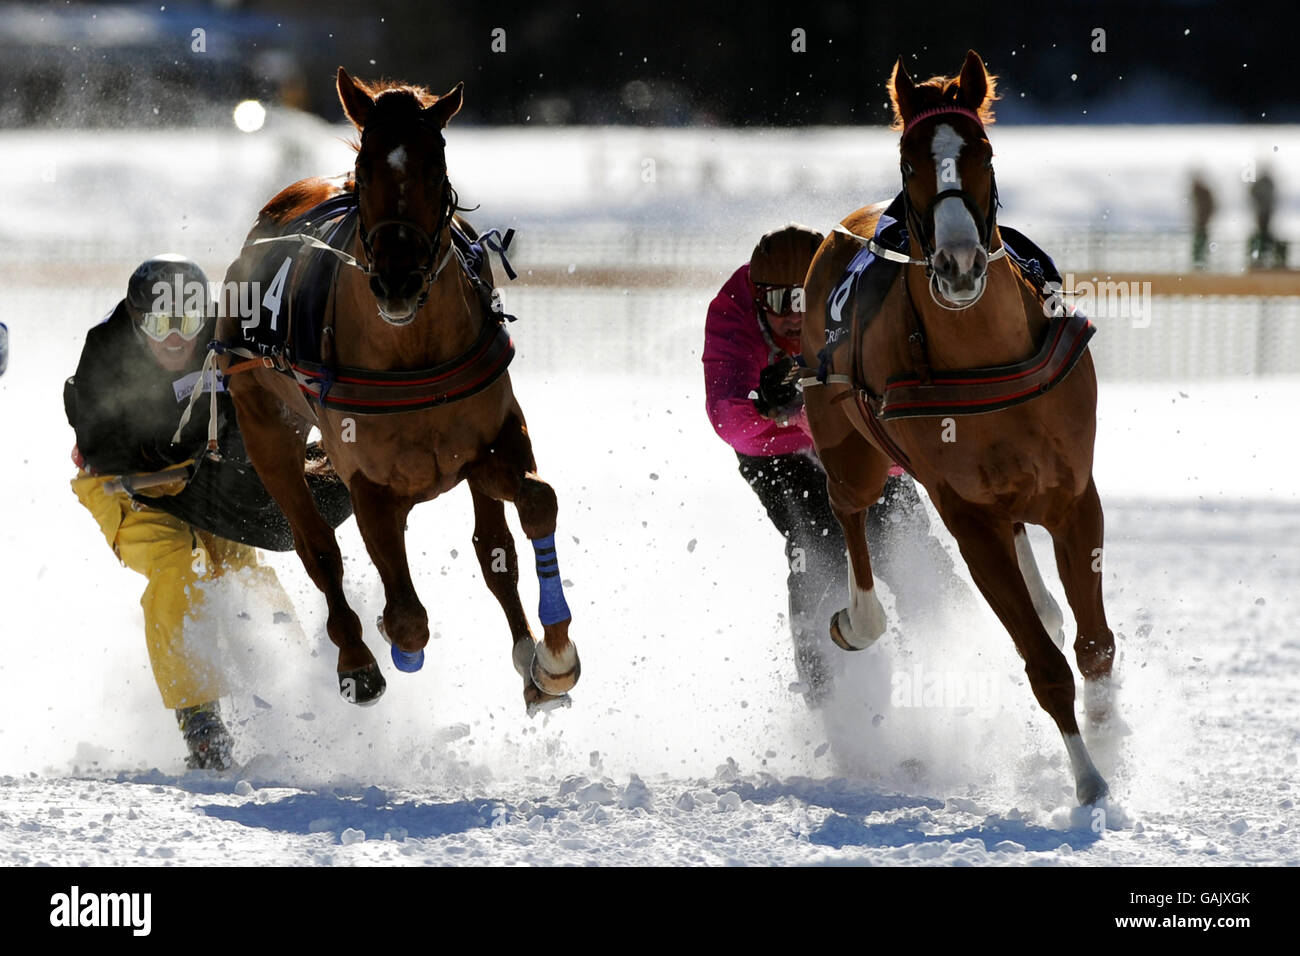 Horses race over the compacted ice and snow on the frozen lake at St Moritz on the first White Turf racing day of 2008. Stock Photo